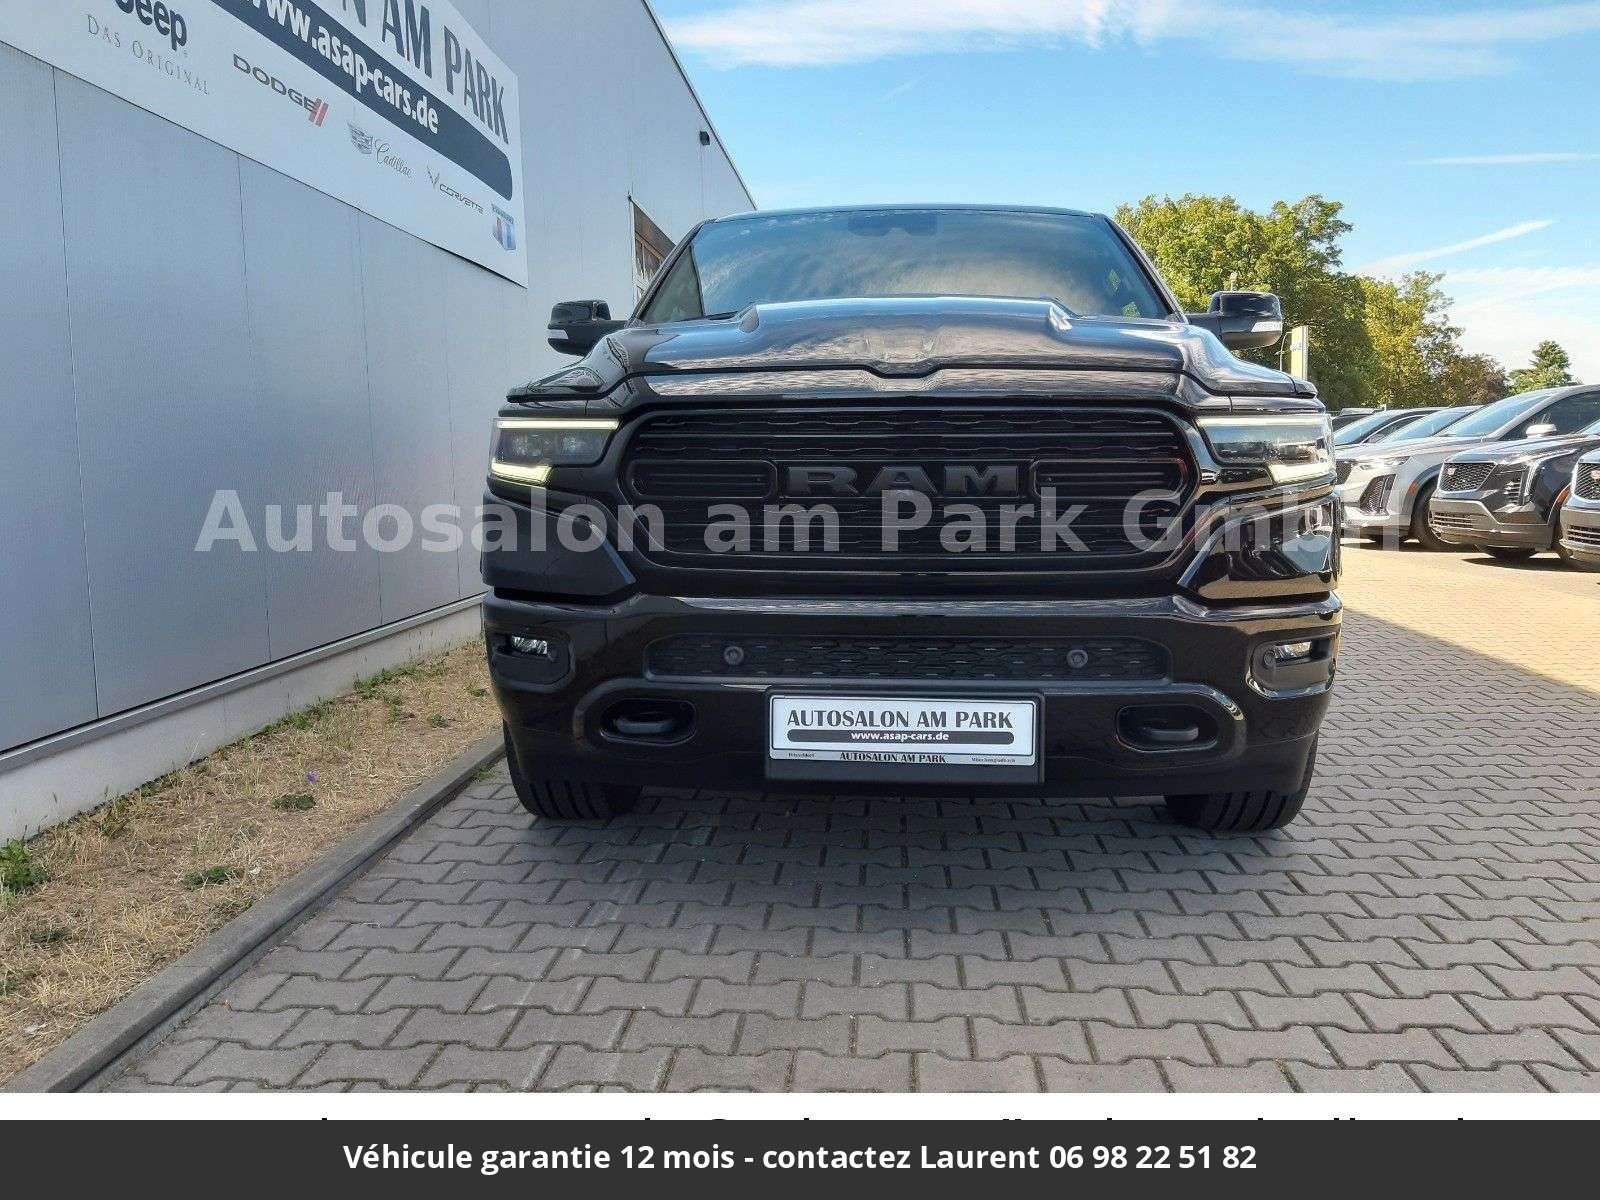 Dodge  RAM Disponible 93 500ht  4 places crew cab limited night gpl